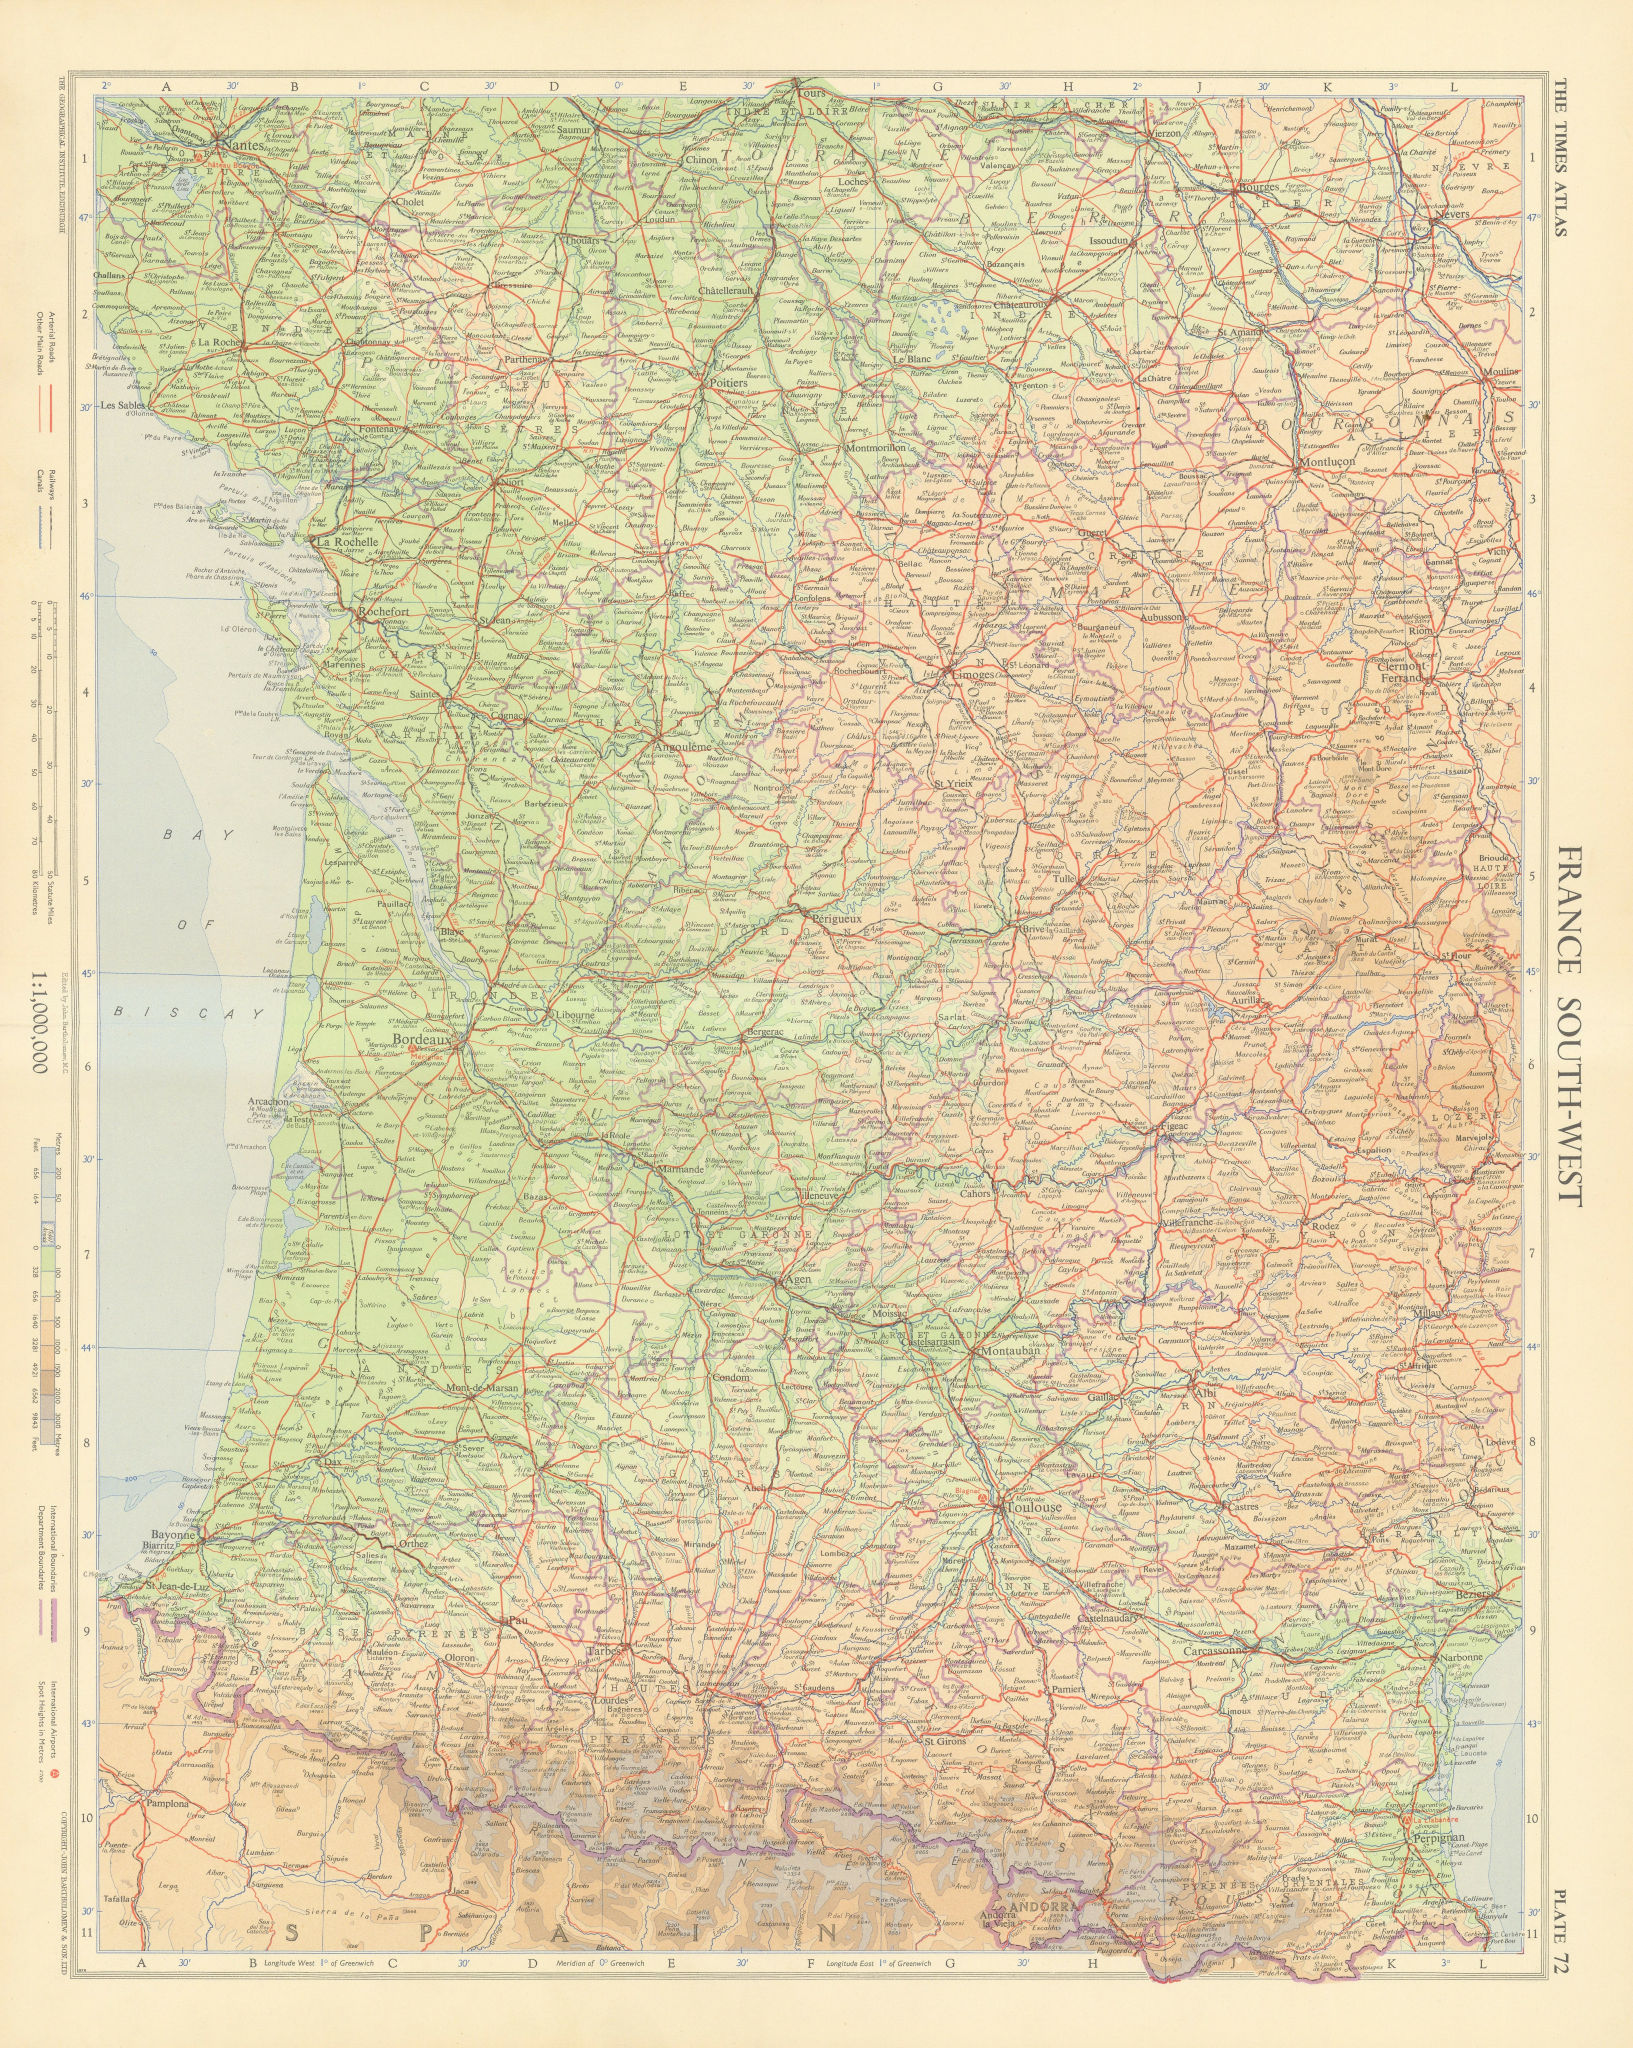 Associate Product France south-west. Aquitaine Occitanie. TIMES 1955 old vintage map plan chart